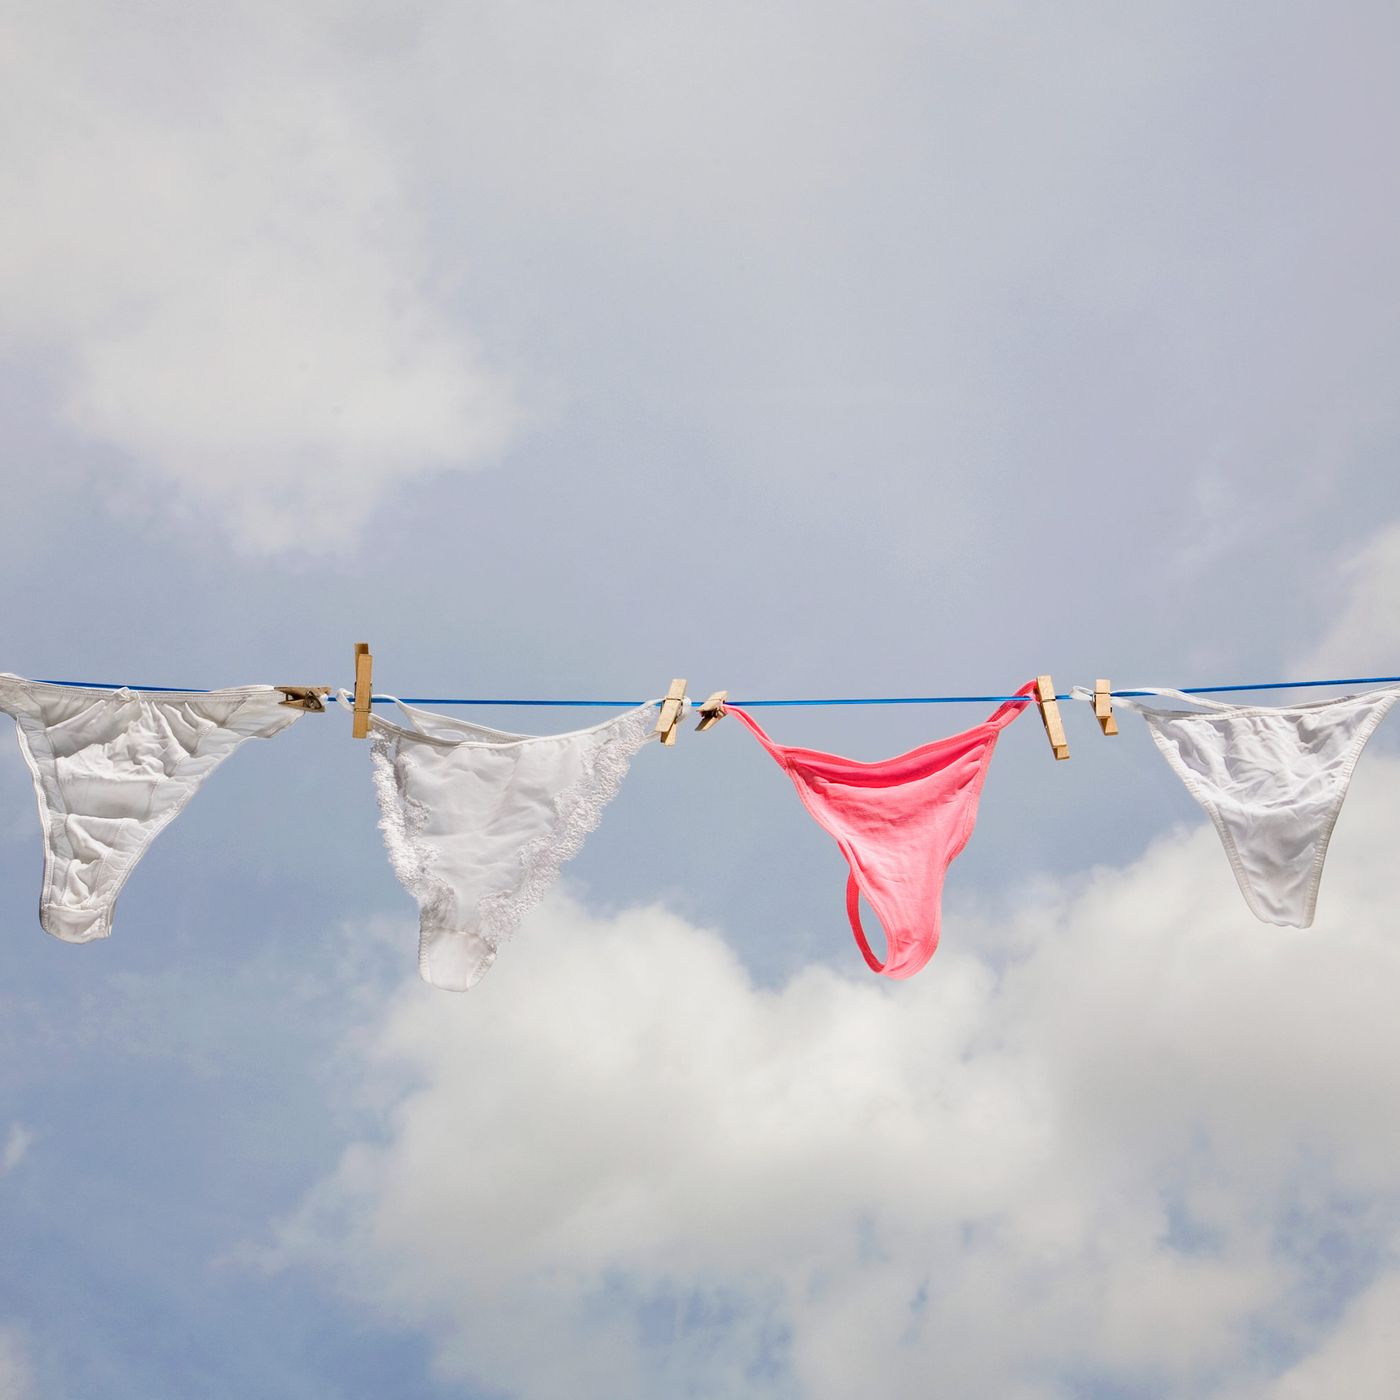 Why do a bra and panties have to match? - Quora